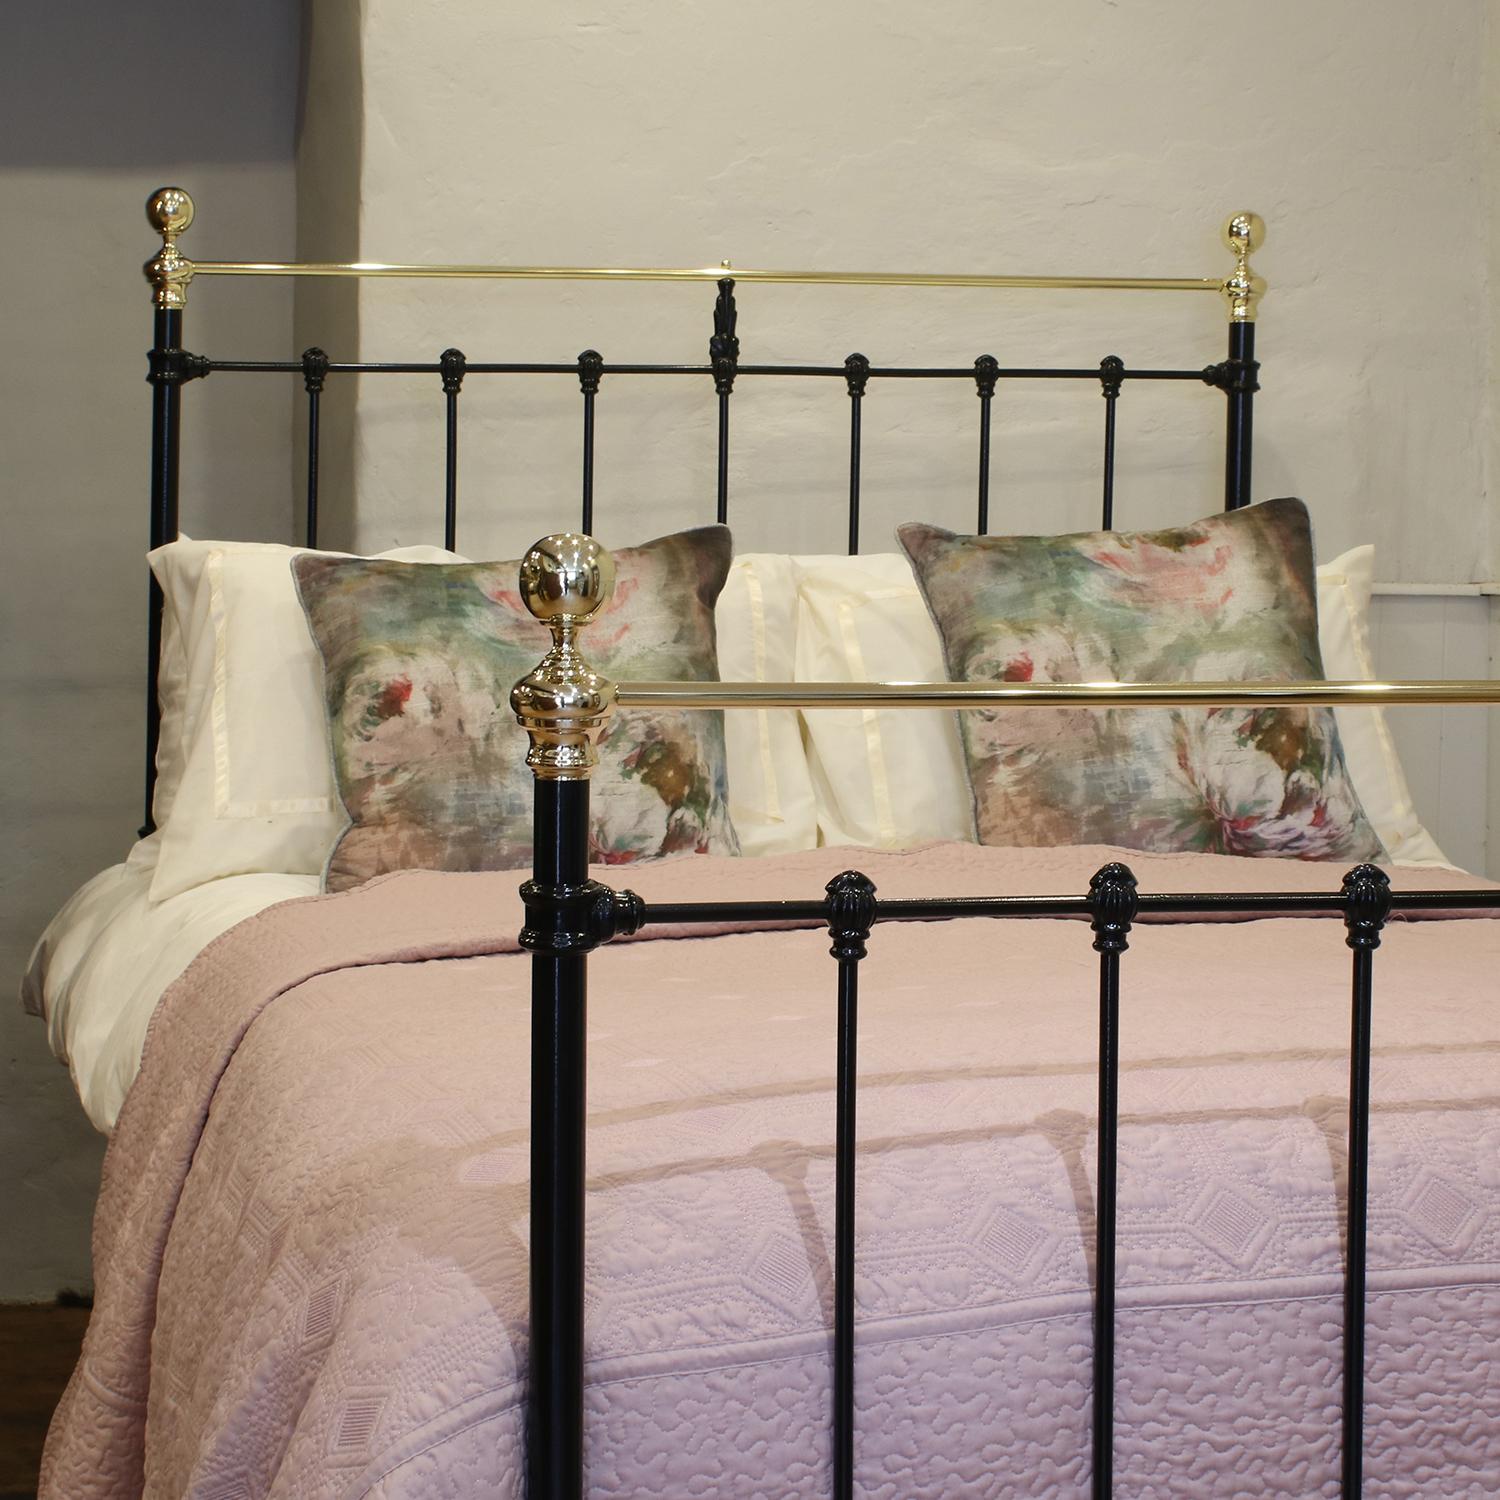 Victorian brass and cast iron bedstead, finished in black with a curved top brass rail. The head and foot board have attractive mouldings alongside a central brass finial in the foot board and a cast iron finial in the head board.

This bed